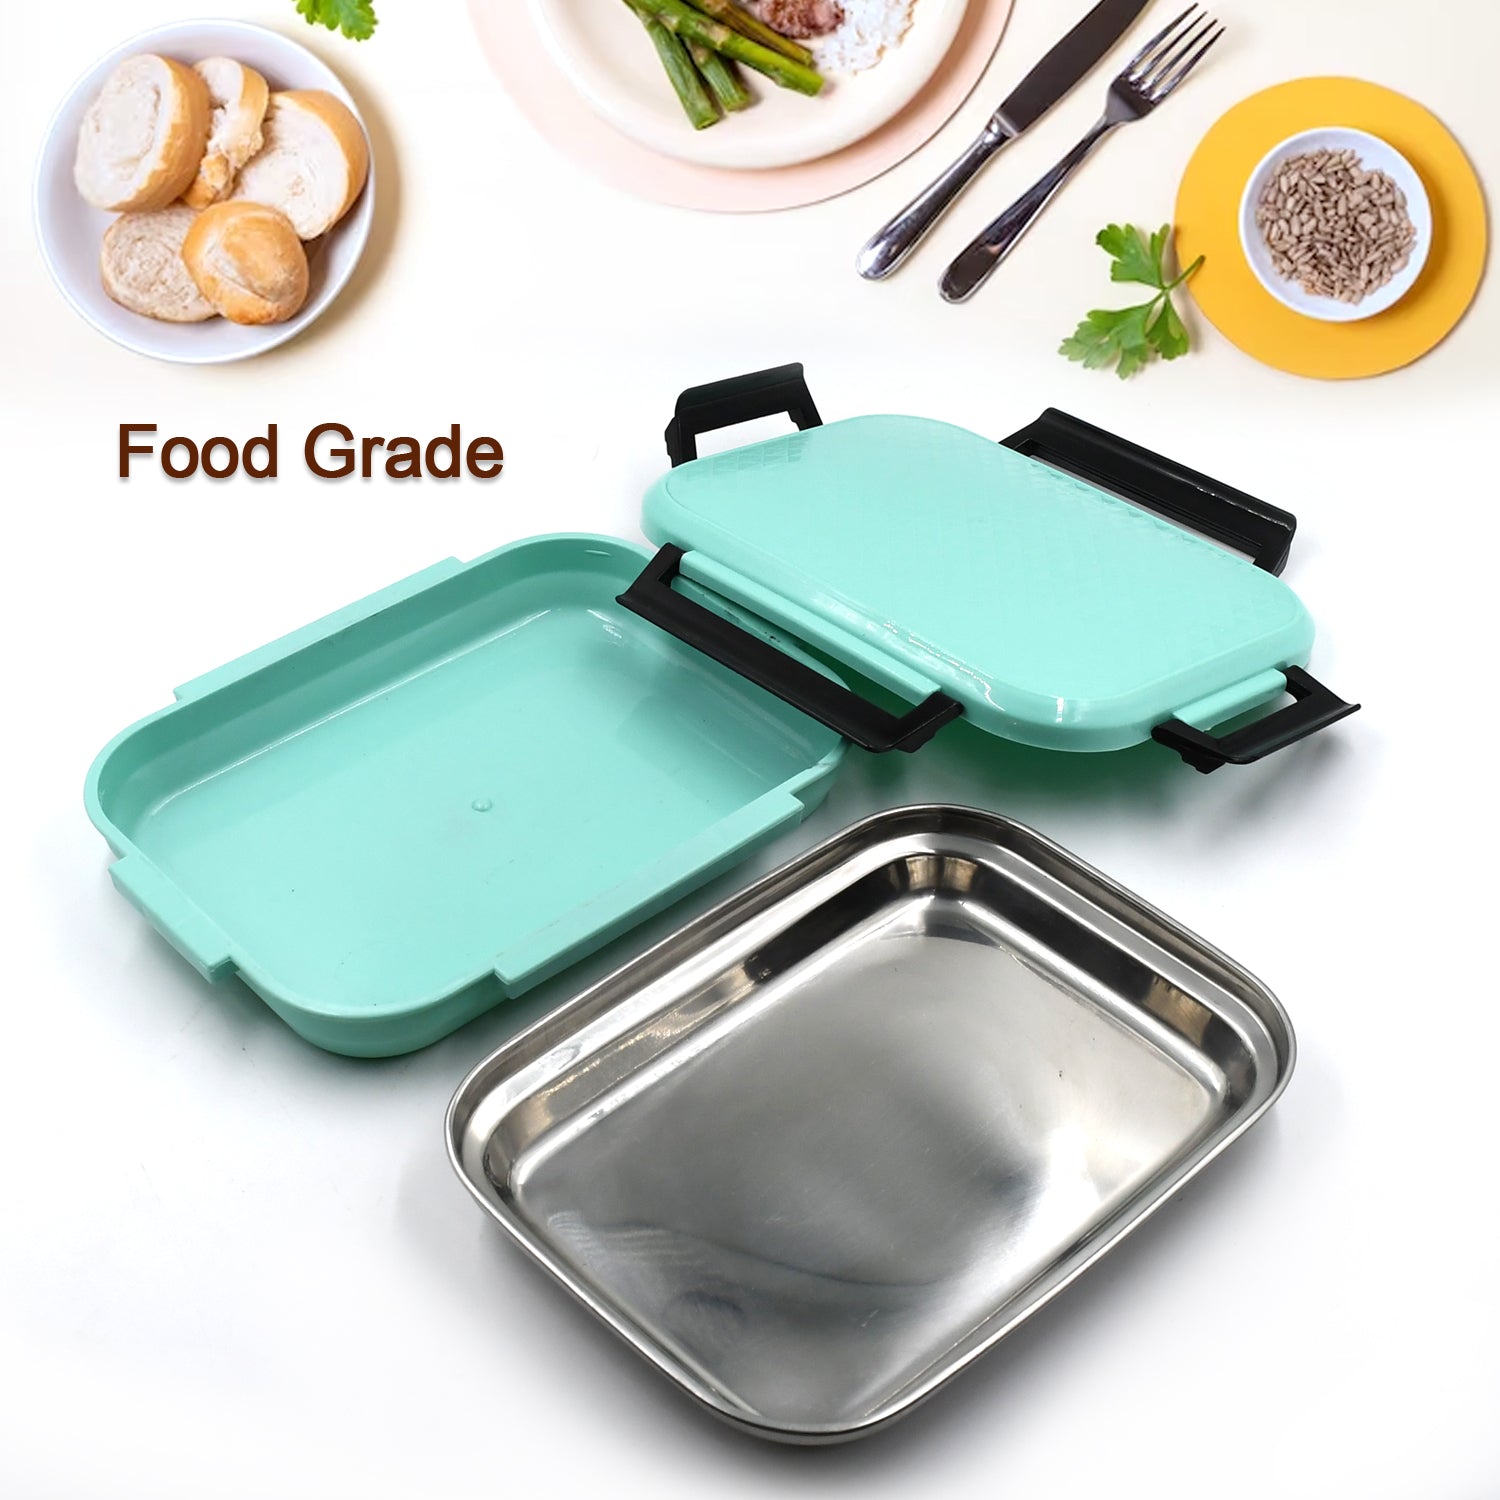 5367 Lunch Box Food Containers for School Vivid Insulated Lunch Bag Keep Fresh Delicate Leak-Proof Anti-Scalding BPA-Free Perfect for a Filling Lunch Outdoor DeoDap